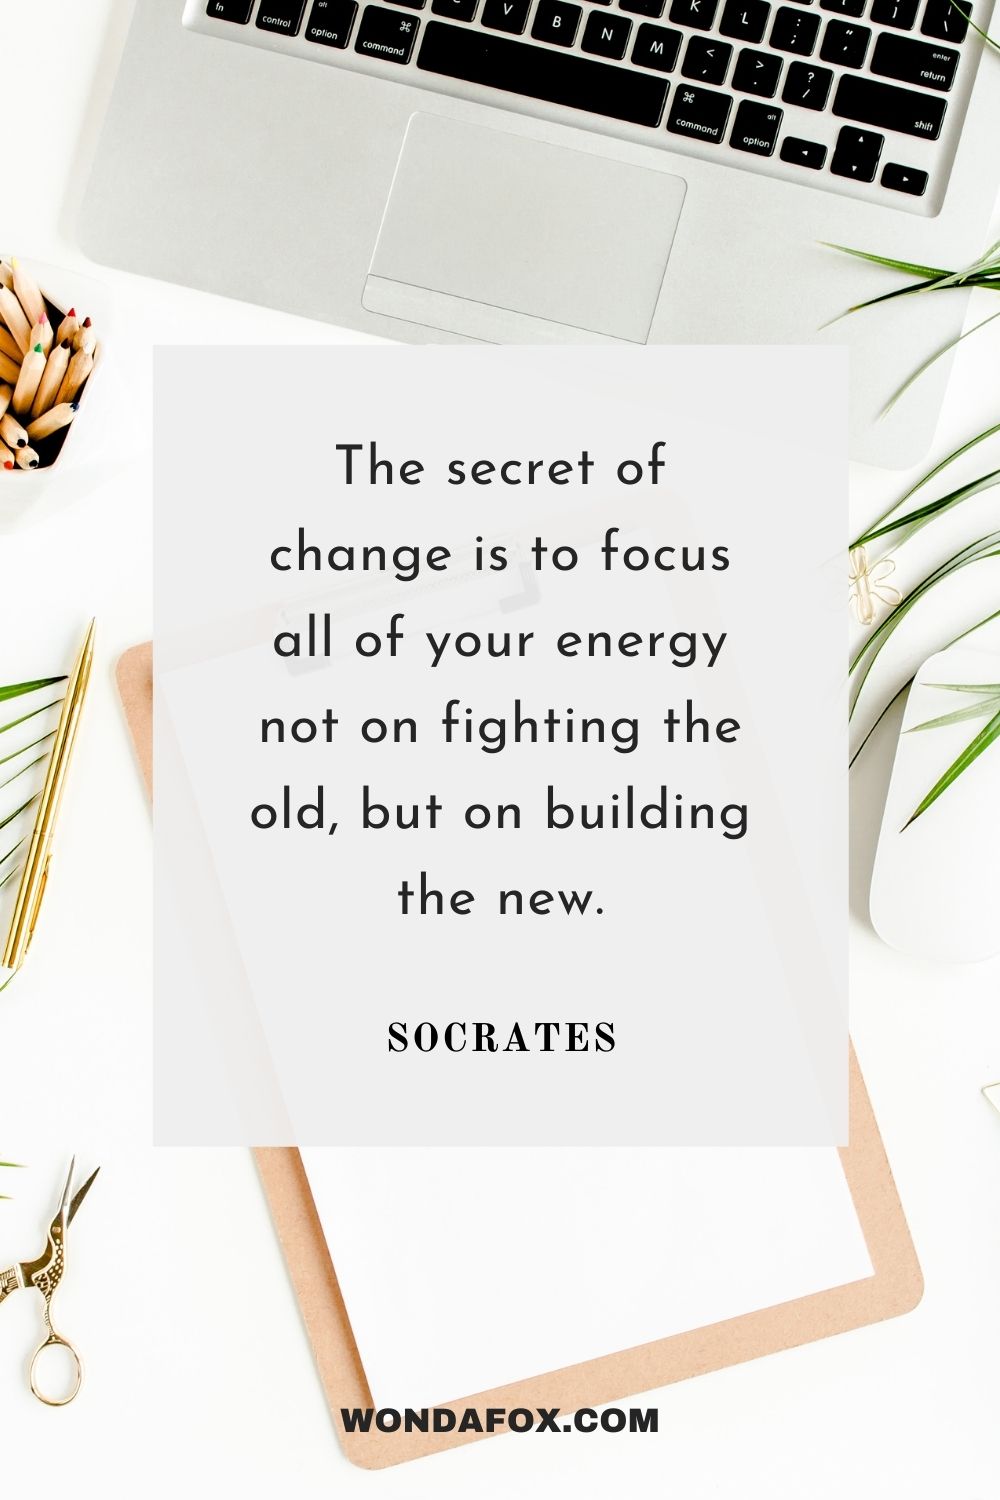 The secret of change is to focus all of your energy not on fighting the old, but on building the new.